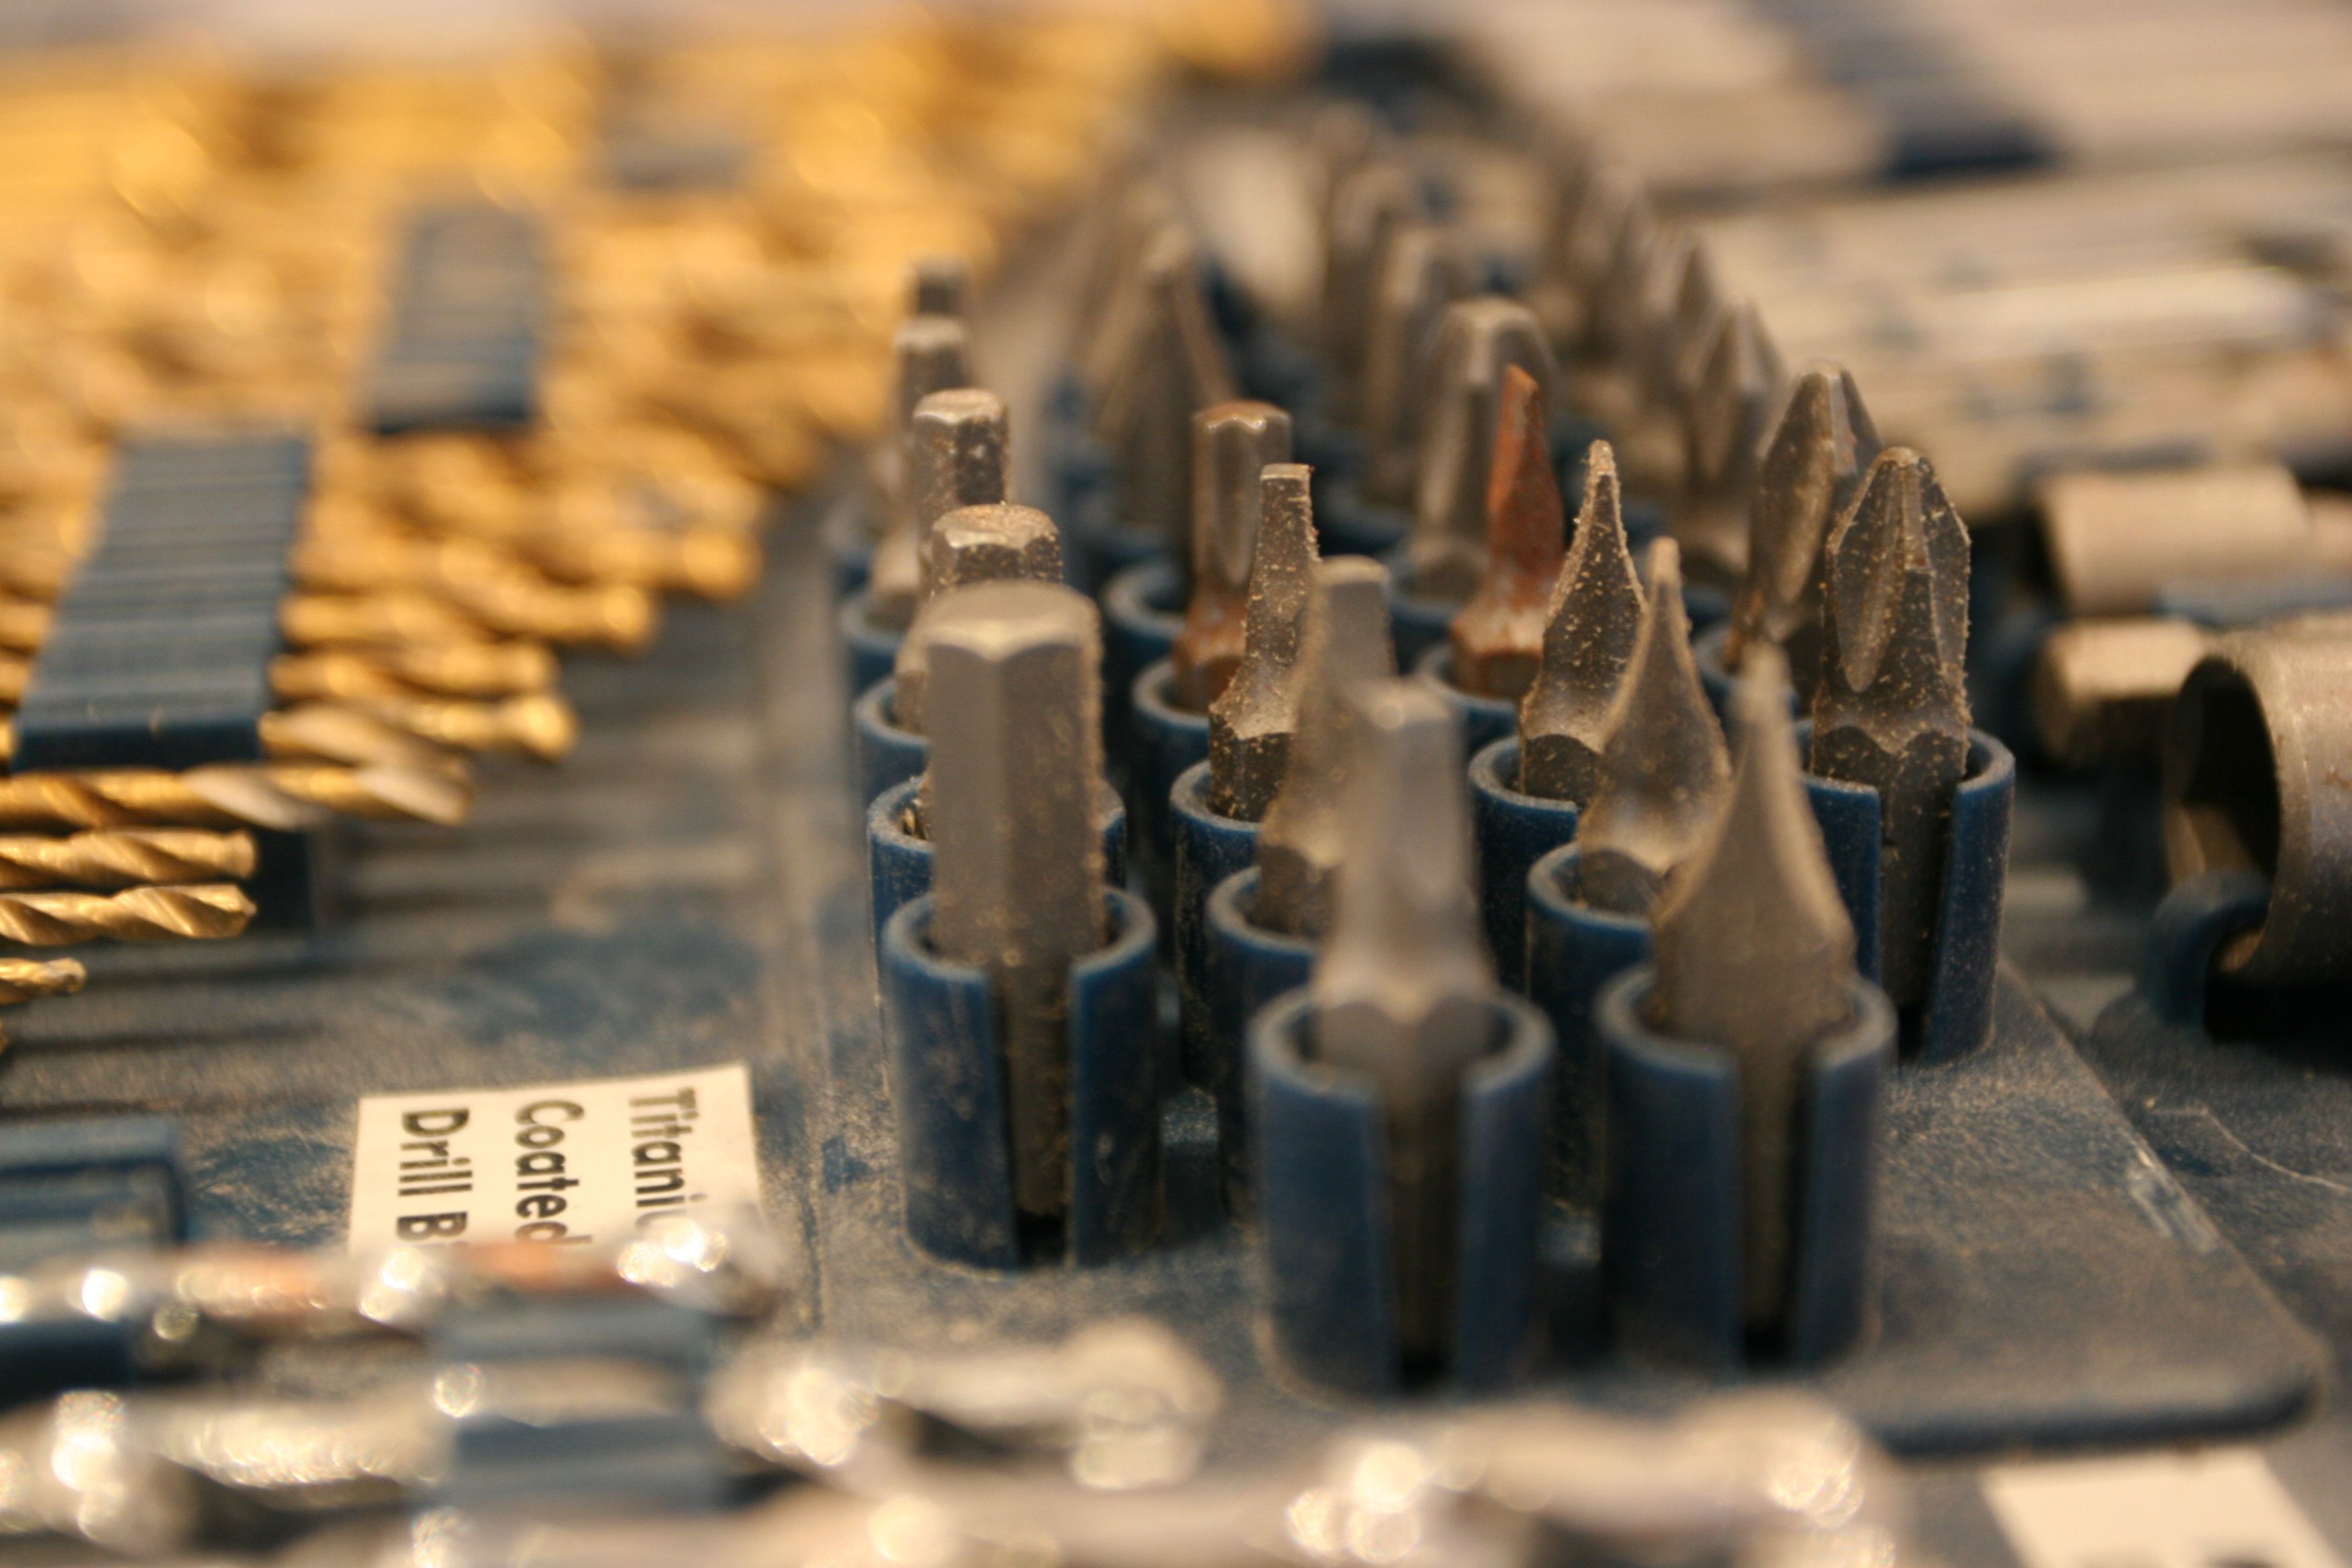 Beauty shot: drill bits. I was sort of mesmerized by the way the colors looked in this slightly off-focus picture. Could inspire an outfit, a room, a house.